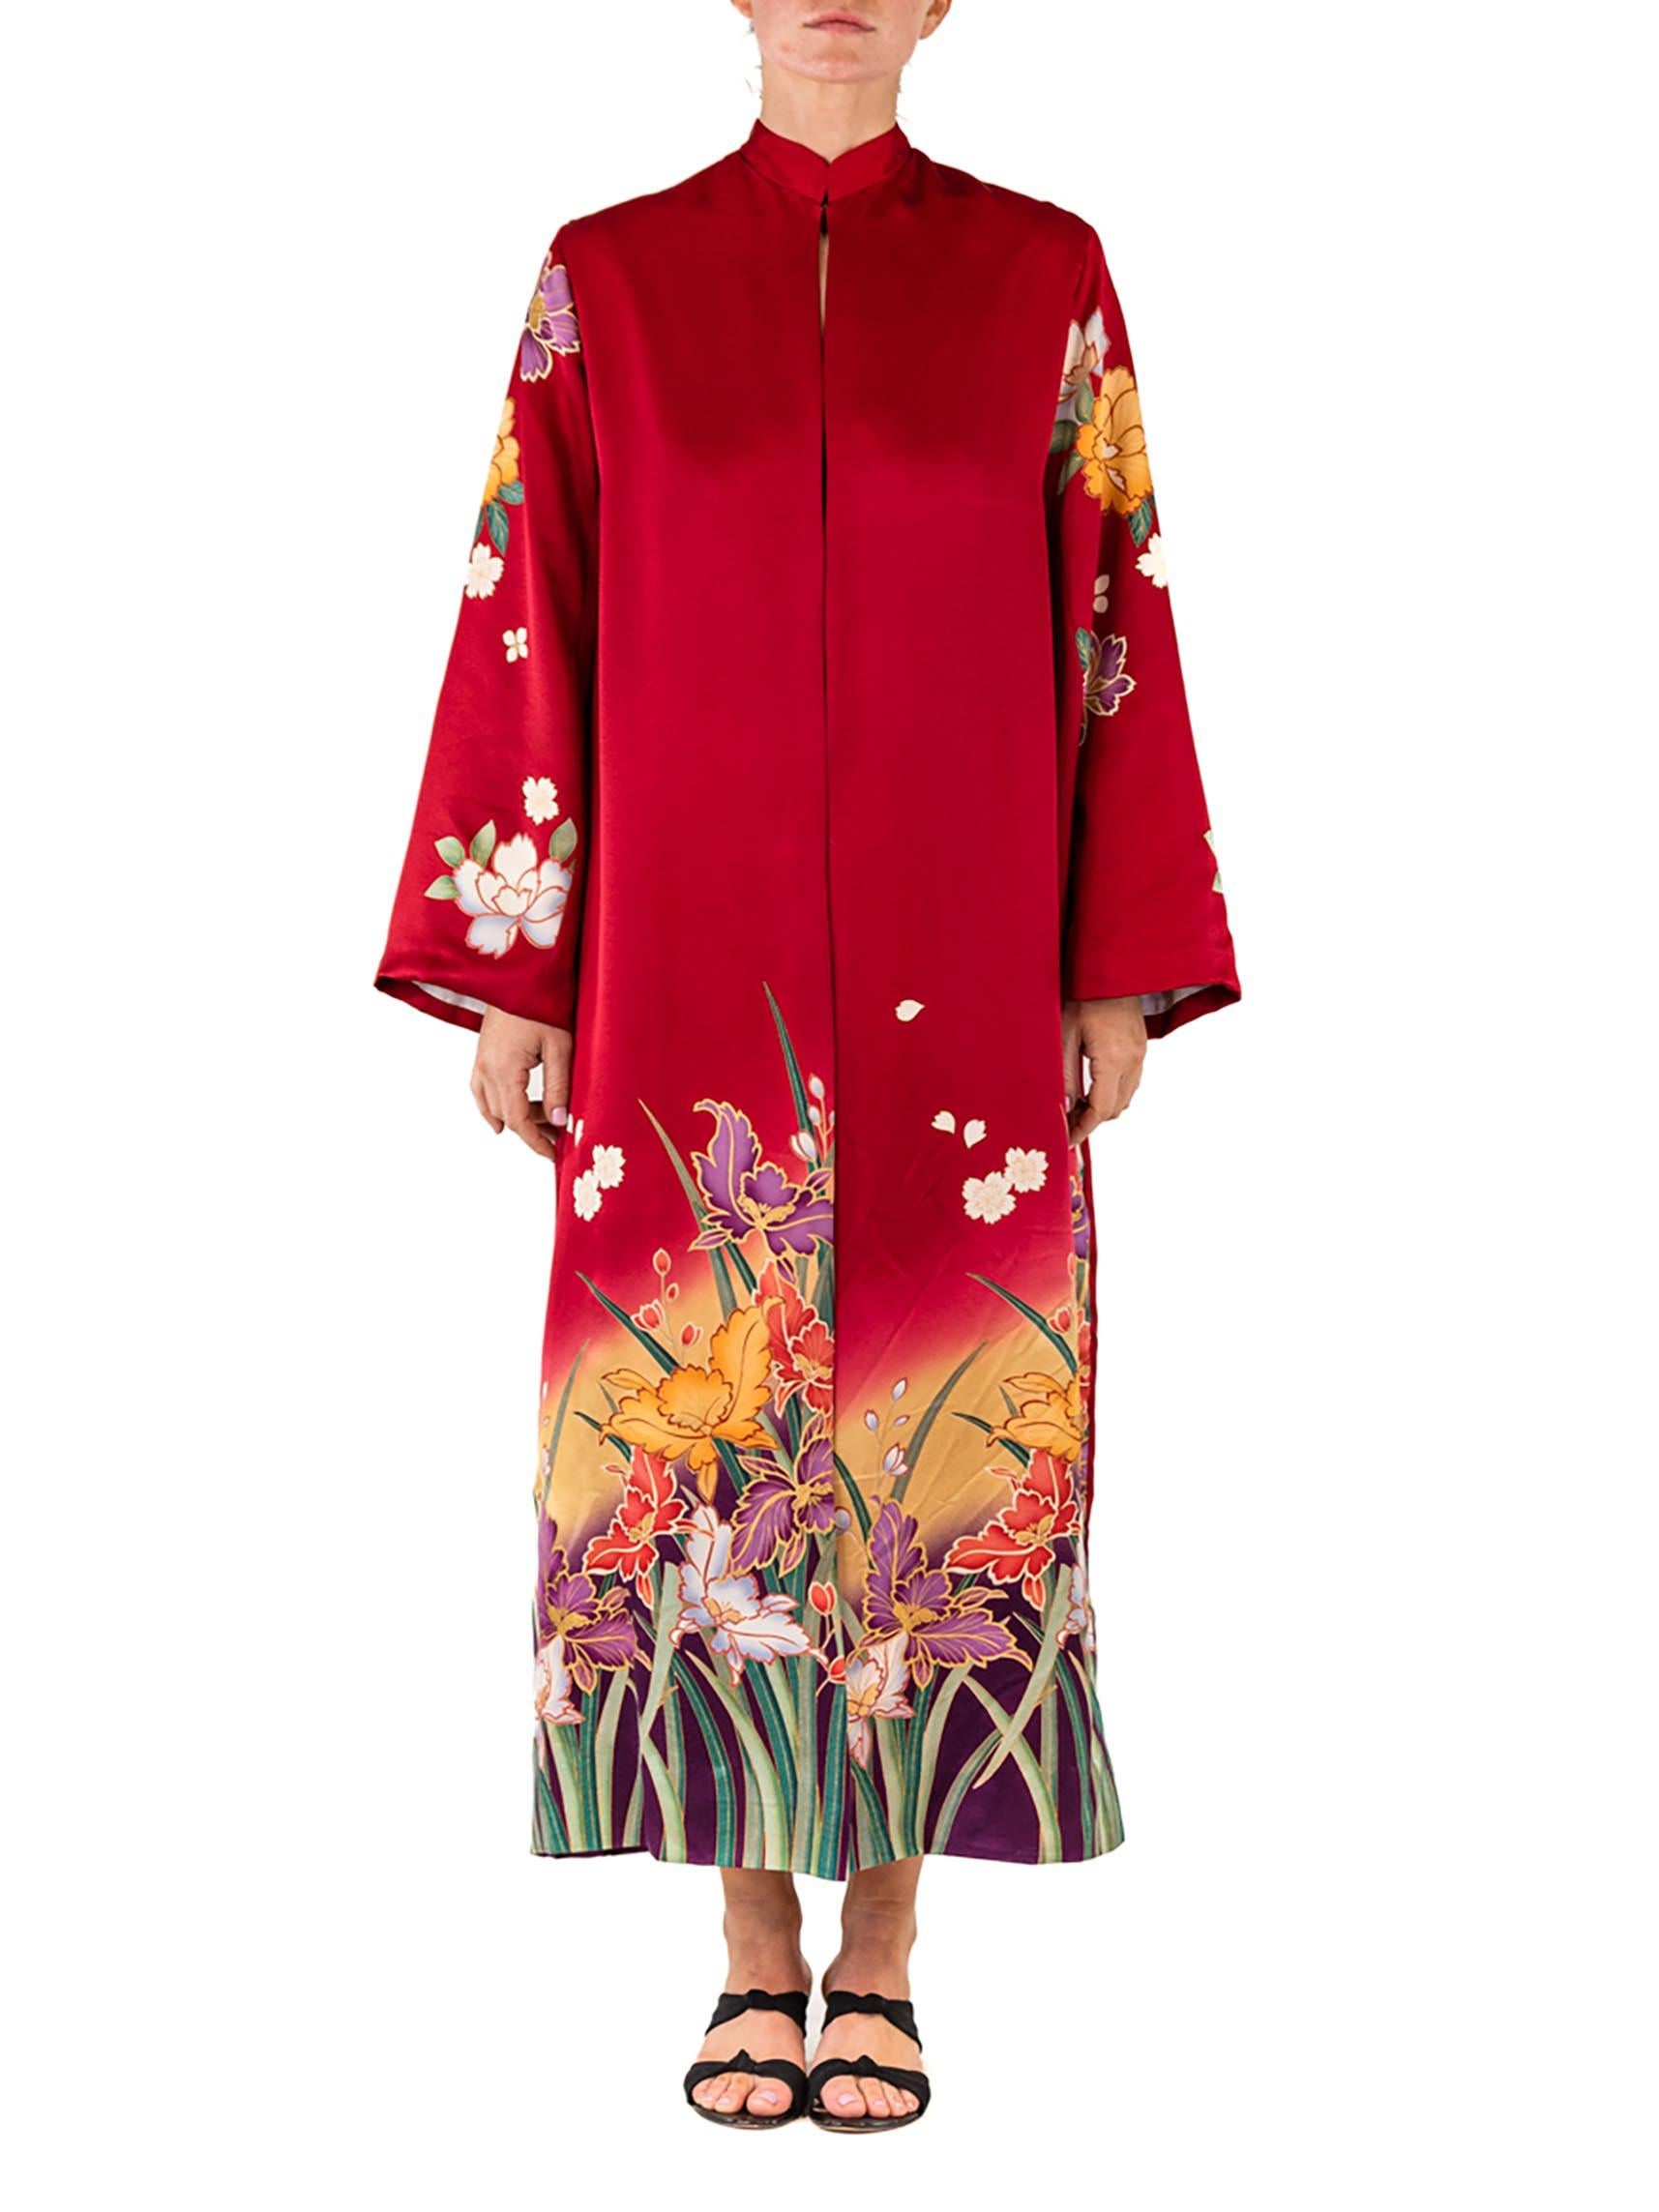 Each duster is made using up-cycled vintage Japanese silks. We source this kimono fabric direct from Japan and most are hand printed and painted. The duster is cut with long lean lines to accentuate height and flatter most body shapes. Fully lined